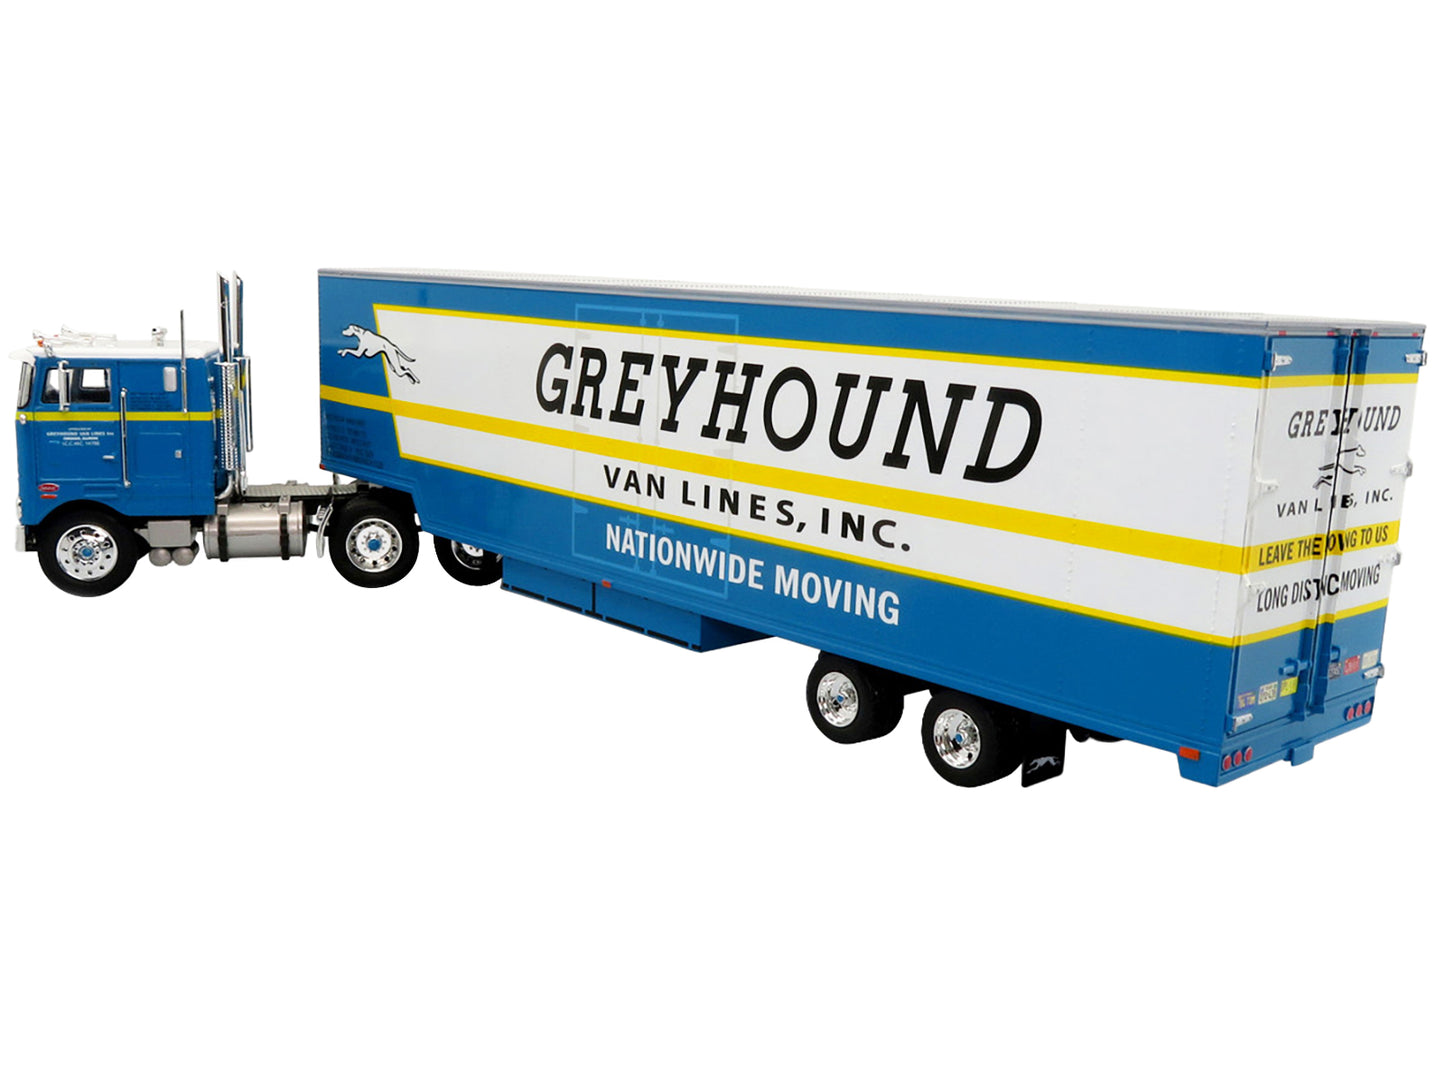 Peterbilt 352 Pacemaker Tractor Truck with Trailer "Greyhound Van Lines Inc." "Vintage Heavy Haul Truck Collection" 1/43 Diecast Model by Iconic Replicas